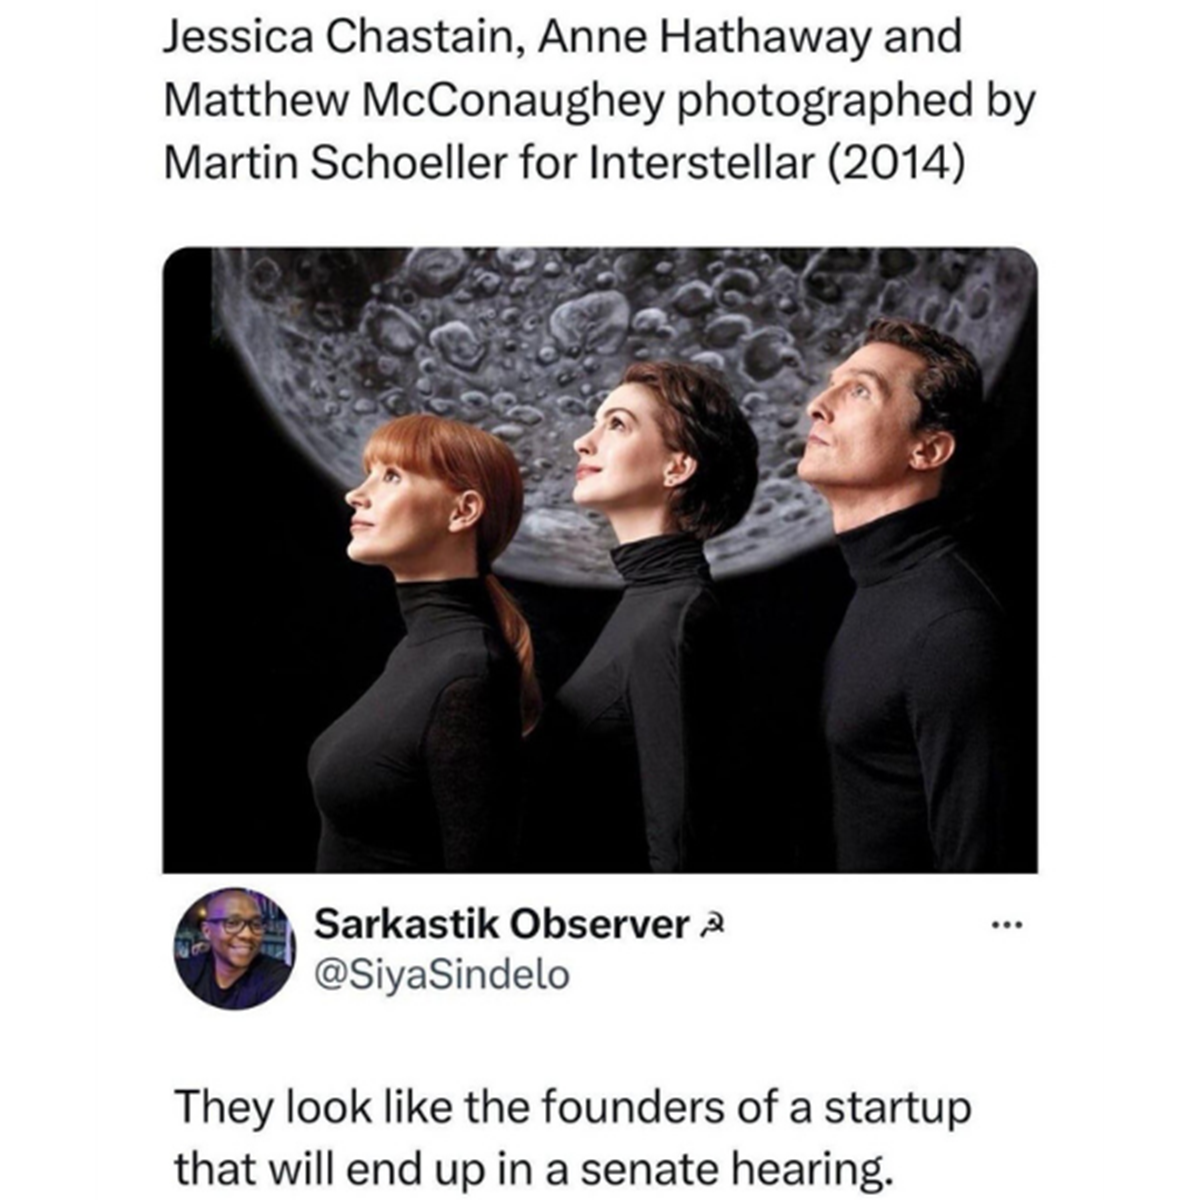 anne hathaway matthew mcconaughey jessica chastain - Jessica Chastain, Anne Hathaway and Matthew McConaughey photographed by Martin Schoeller for Interstellar 2014 Sarkastik Observer They look the founders of a startup that will end up in a senate hearing